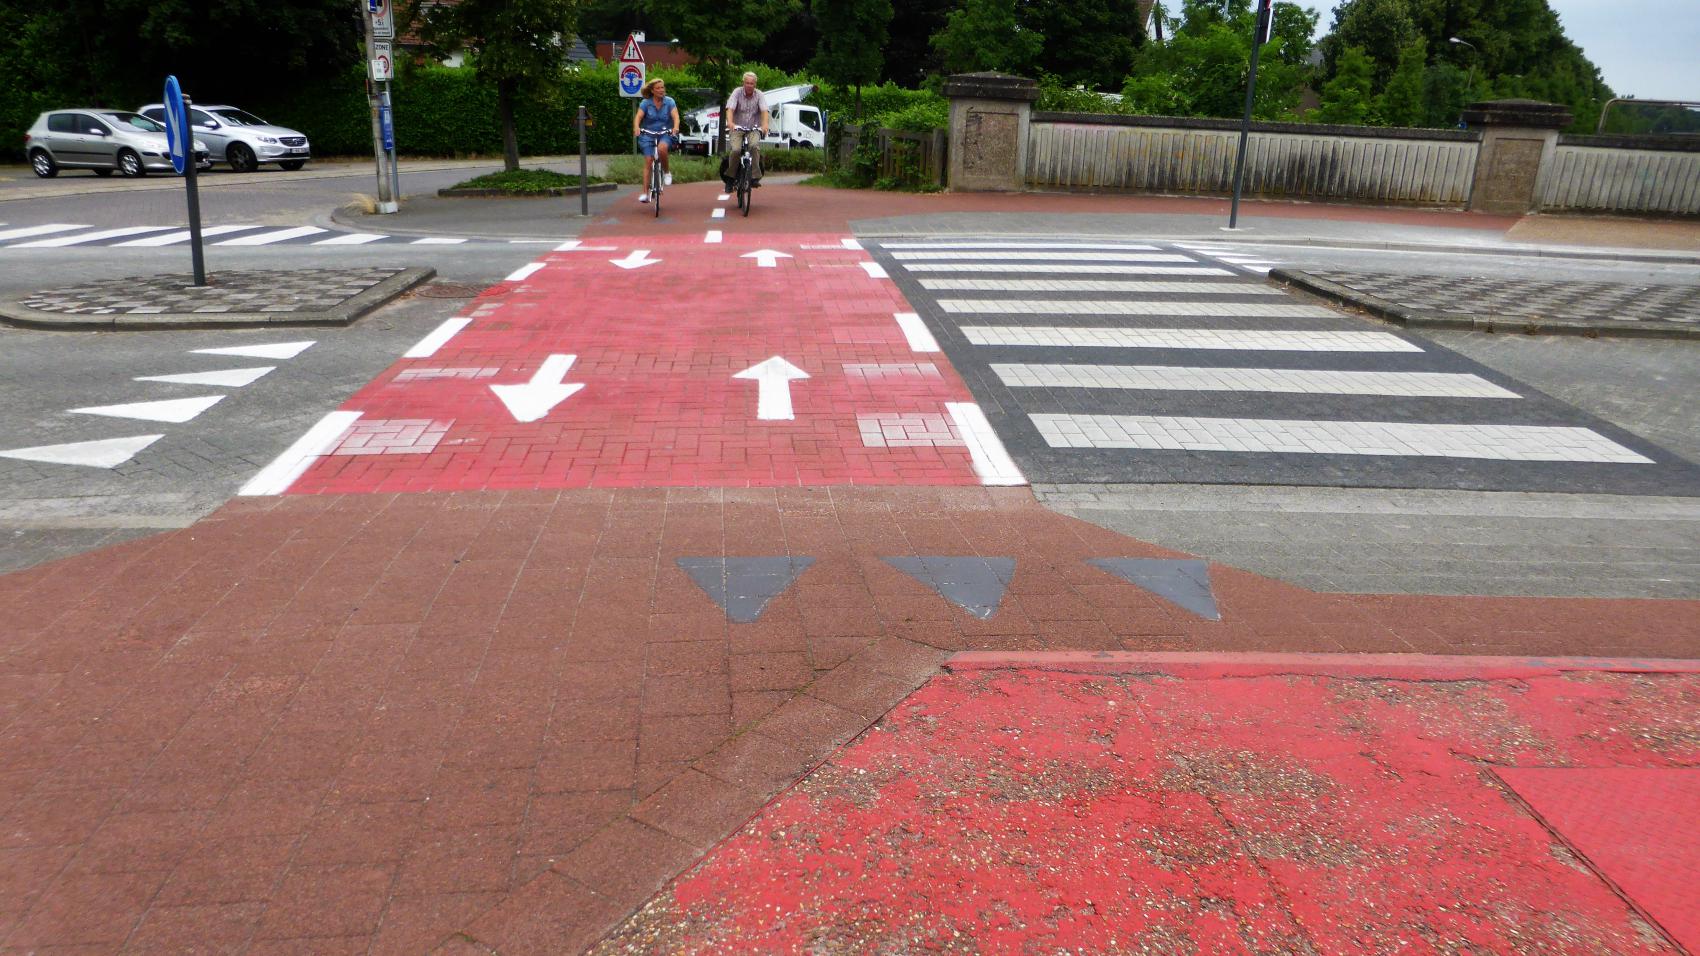 Recently changed priority on the crossing with Deurnestraat in Mortsel. In the past cyclists crossing the carriageway had to give way, now the cycle highway has priority. Old horizontal signs (“shark teeth”) still visible, but greyed out.